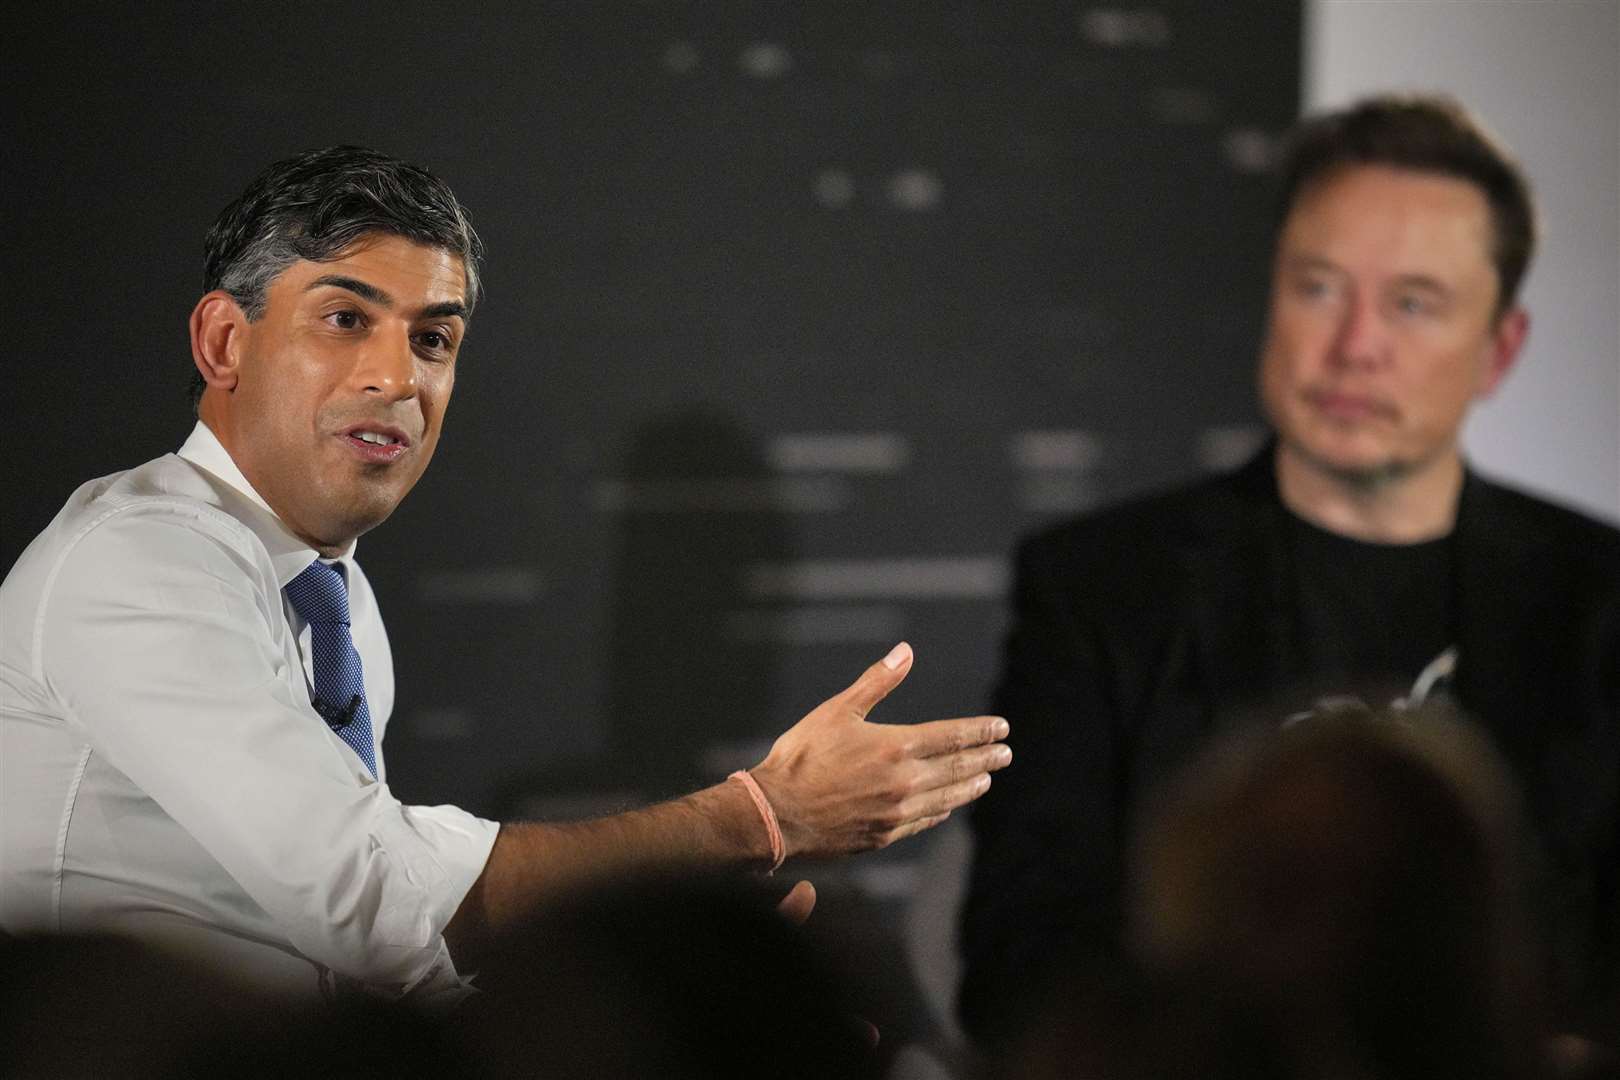 Frank Hester said he was ‘delighted to witness the brilliant AI discussion’ between Rishi Sunak and Elon Musk (Kirsty Wigglesworth/PA)